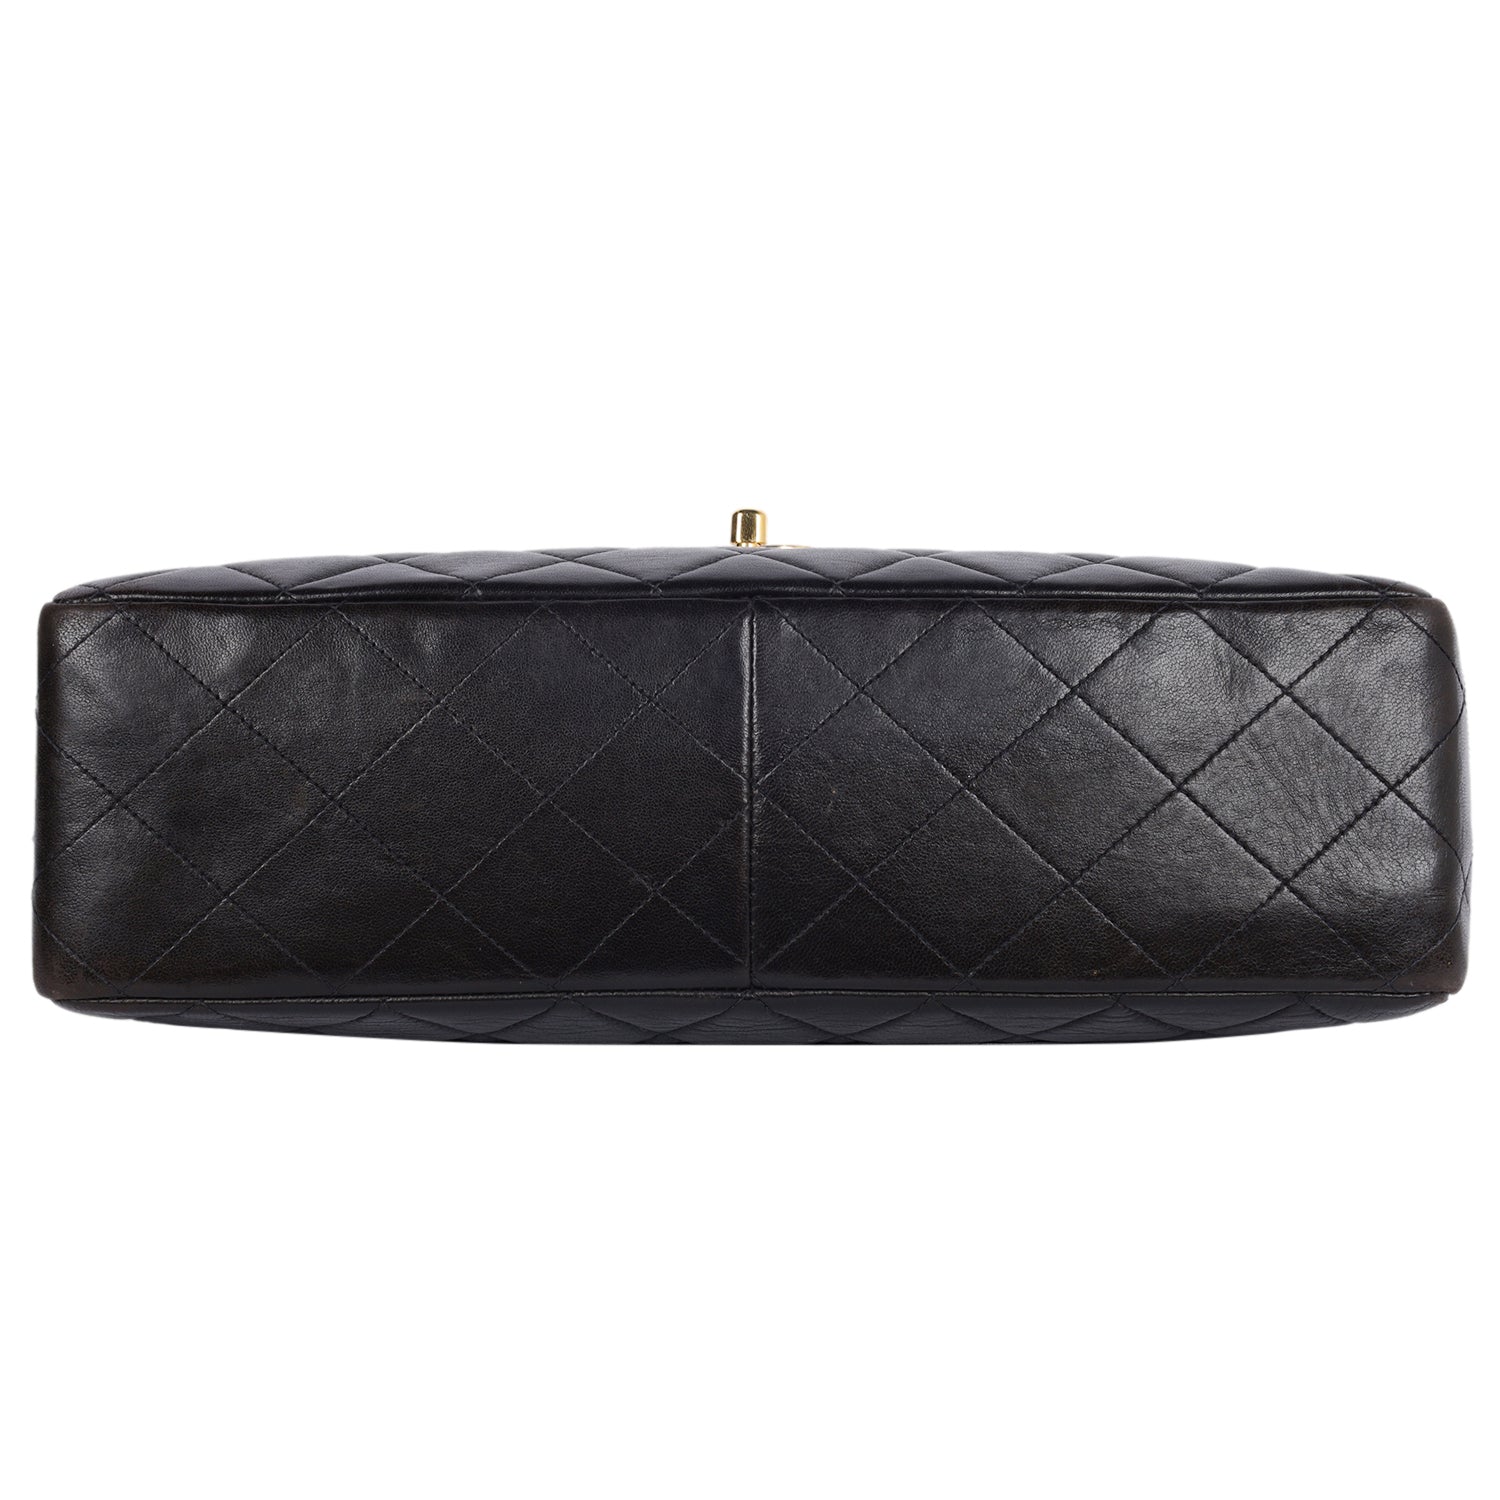 Chanel Black Quilted Lambskin Jumbo XL Vintage Classic Flap Bag Chanel